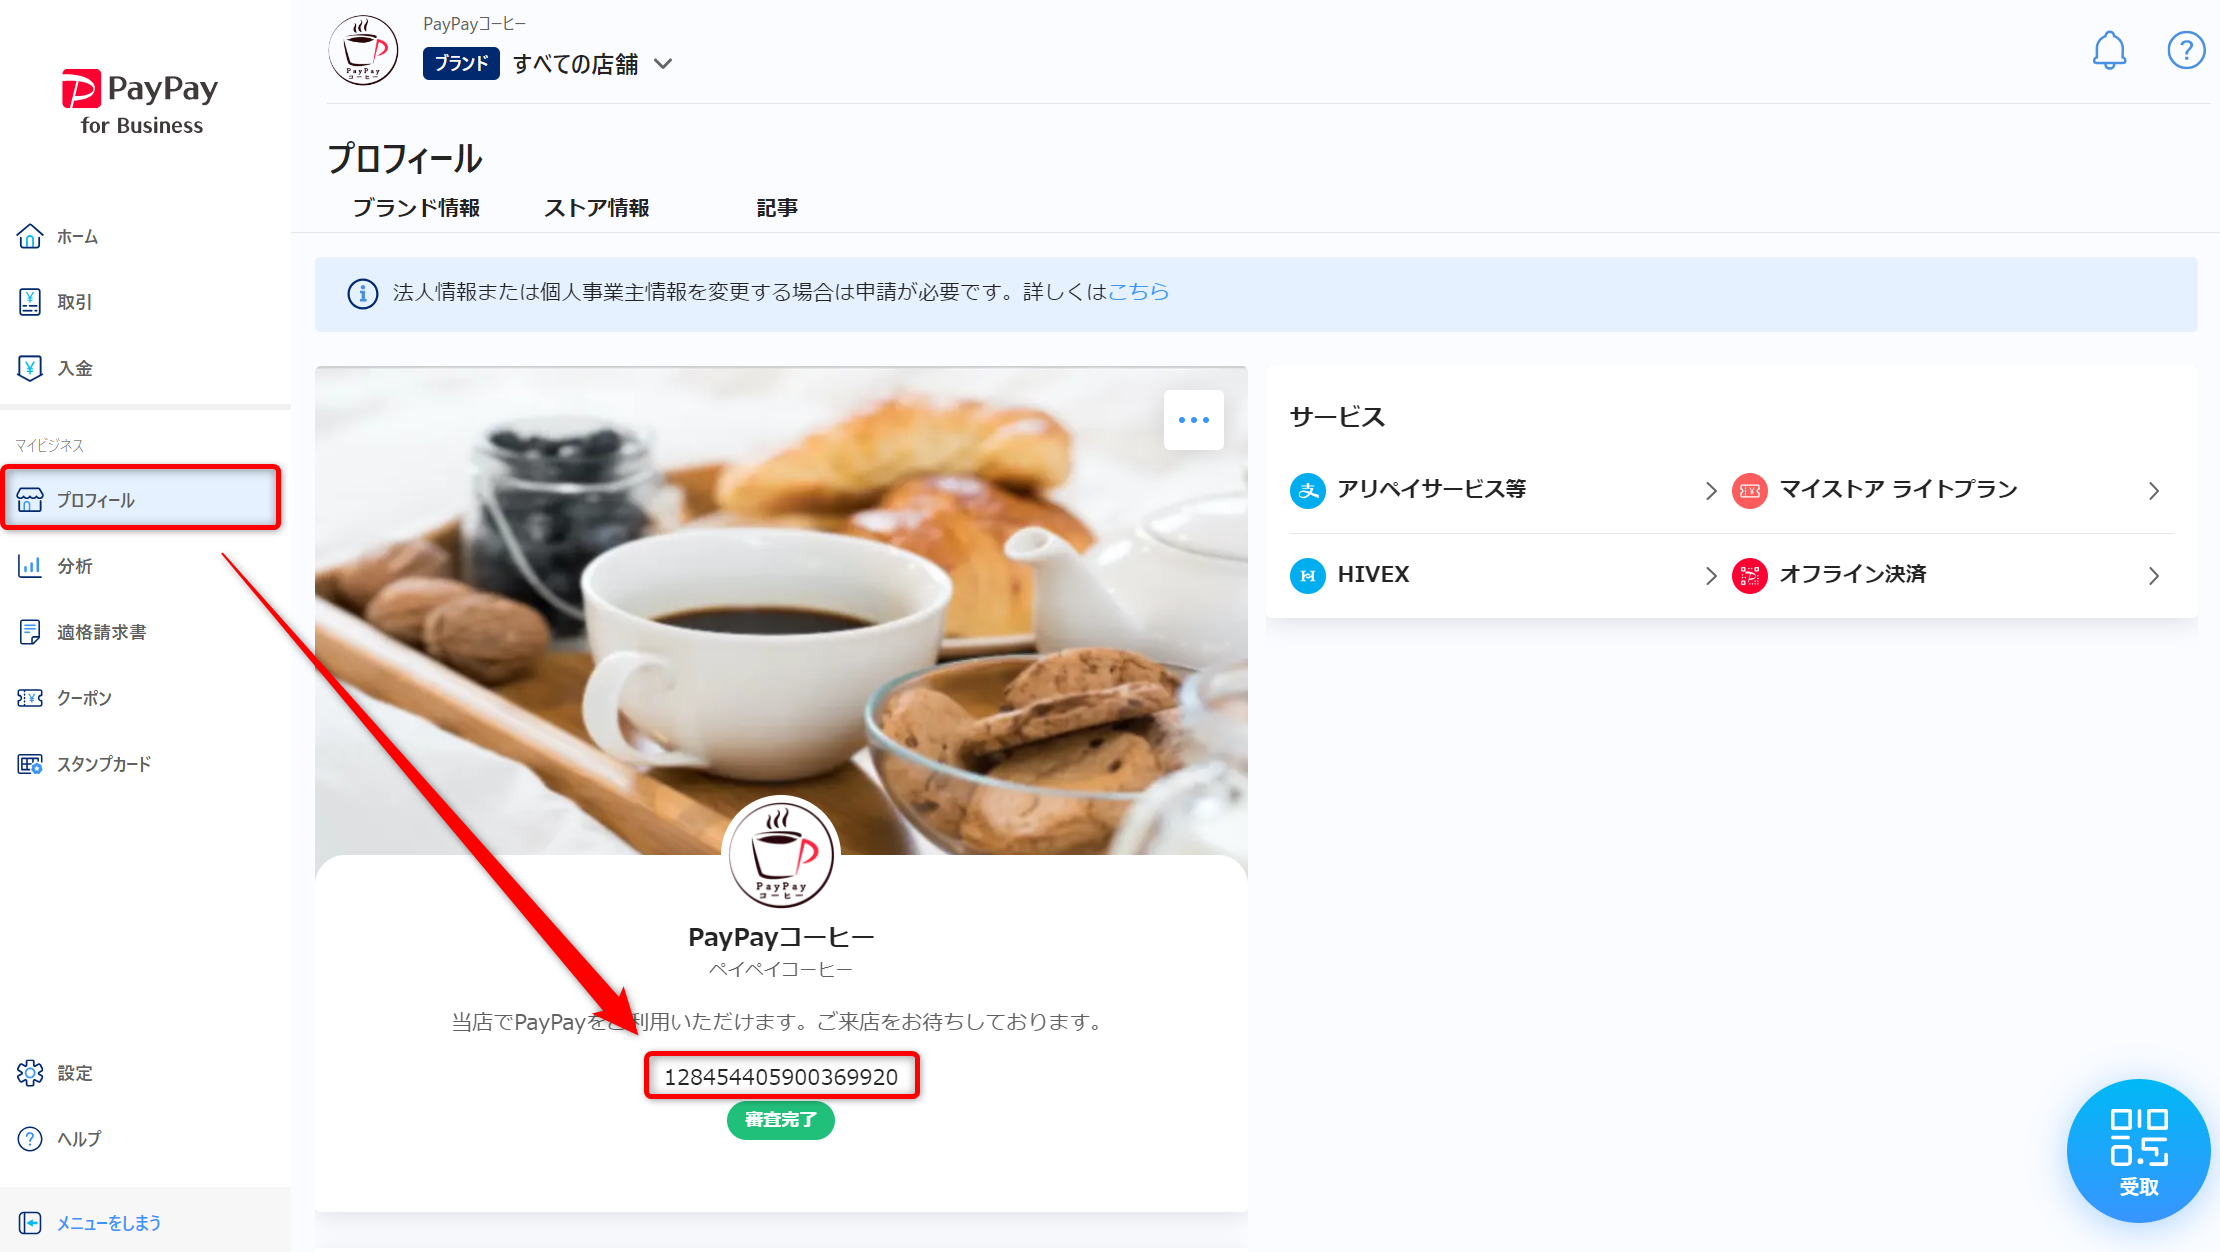 PayPay for Business（加盟店管理ツール）の加盟店名表示画面